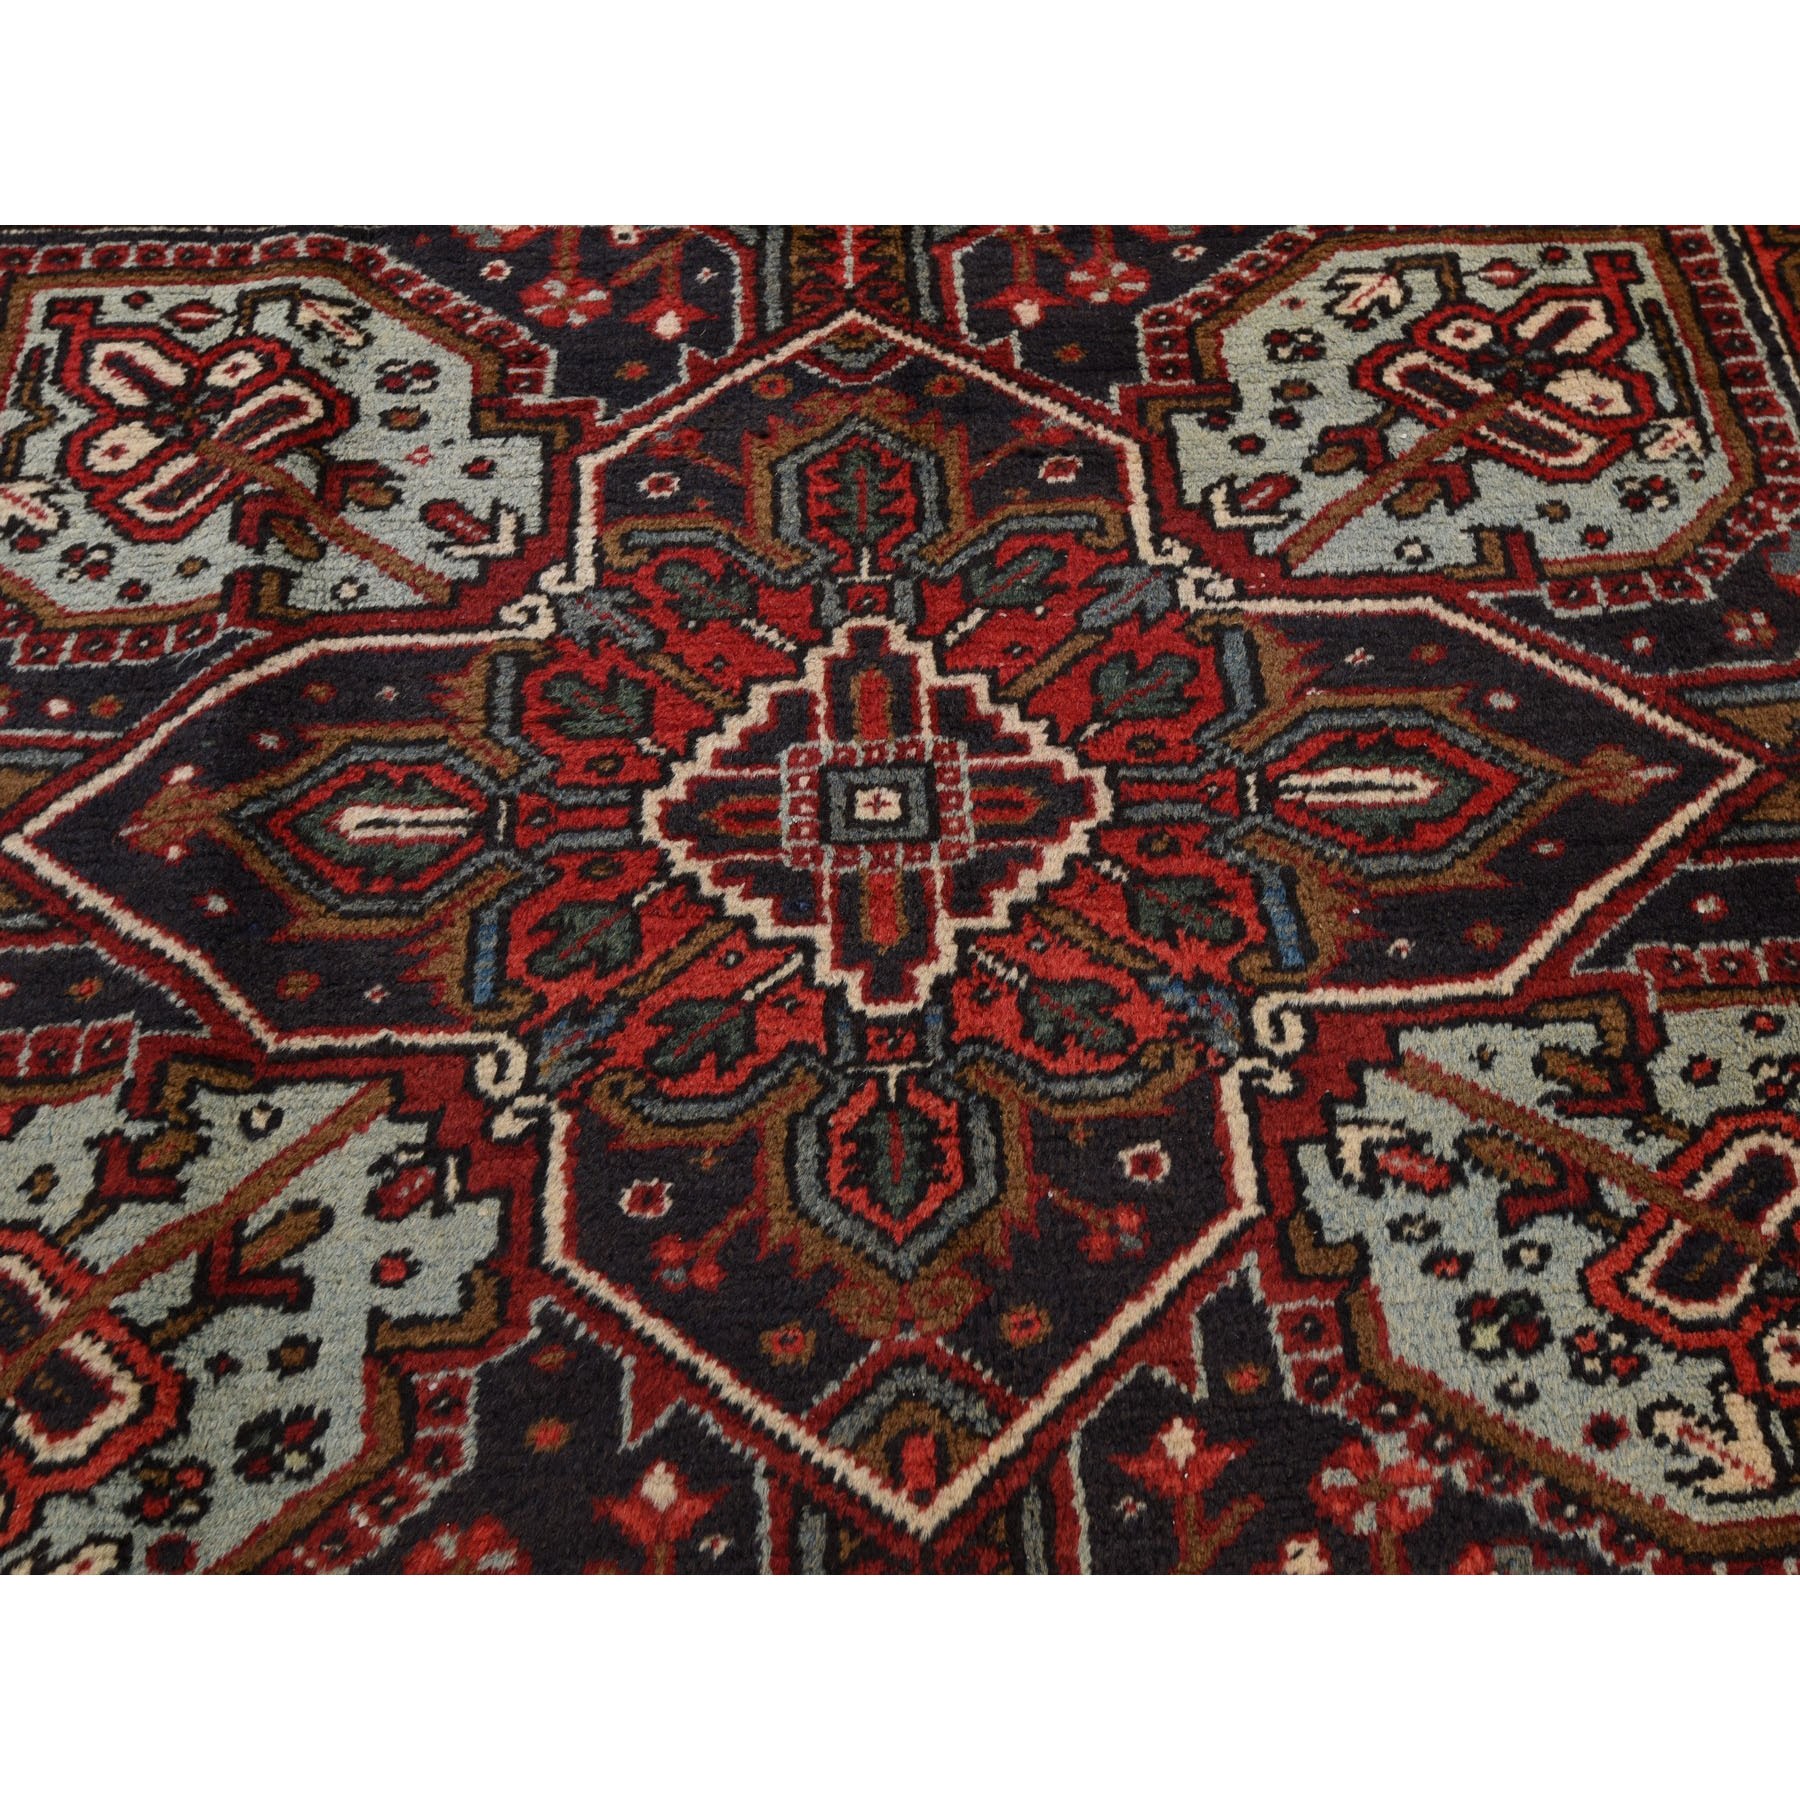 9-1 x11-7  Red Semi Antique Persian Heriz Geometric Design Thick and Plush Hand Knotted Oriental Rug 